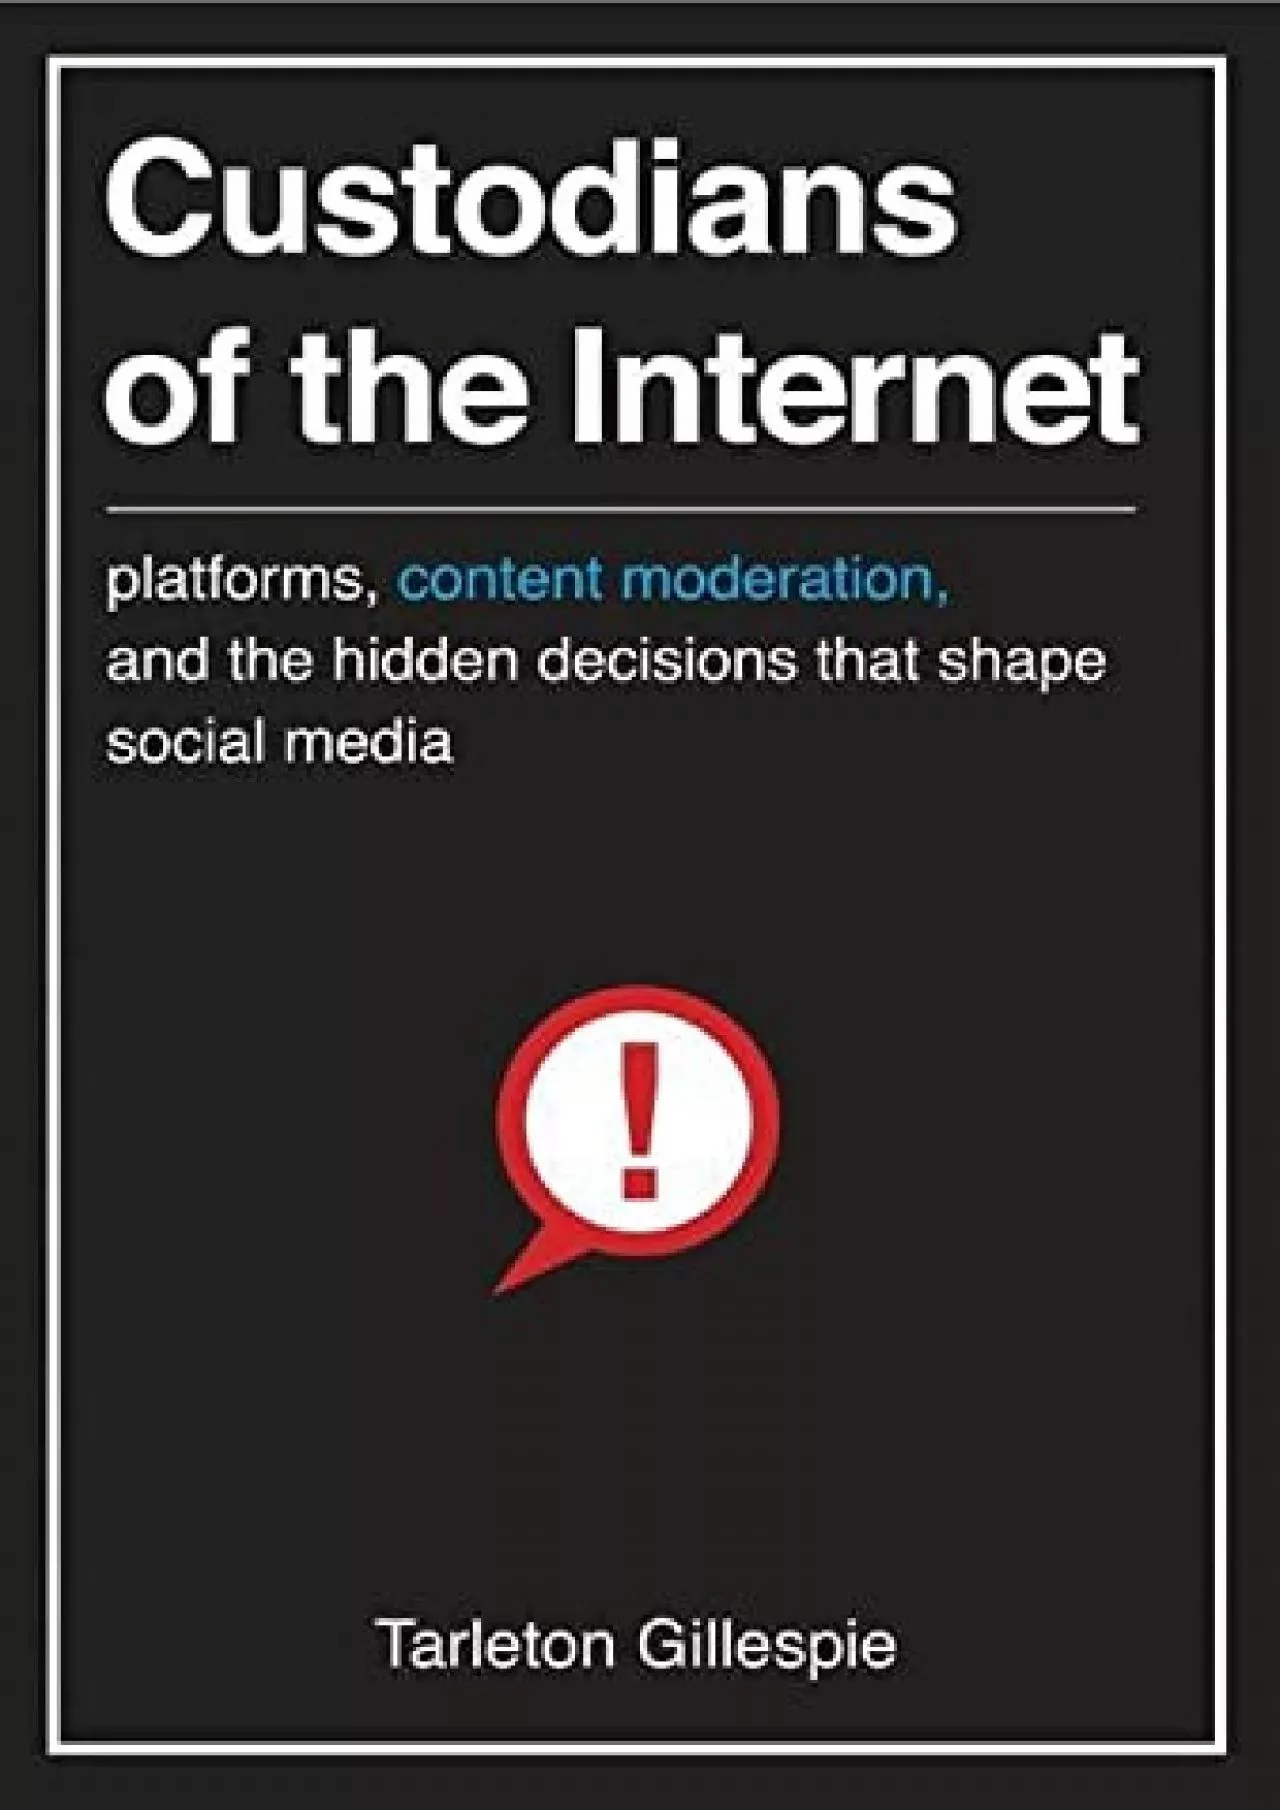 Custodians of the Internet: Platforms, Content Moderation, and the Hidden Decisions That